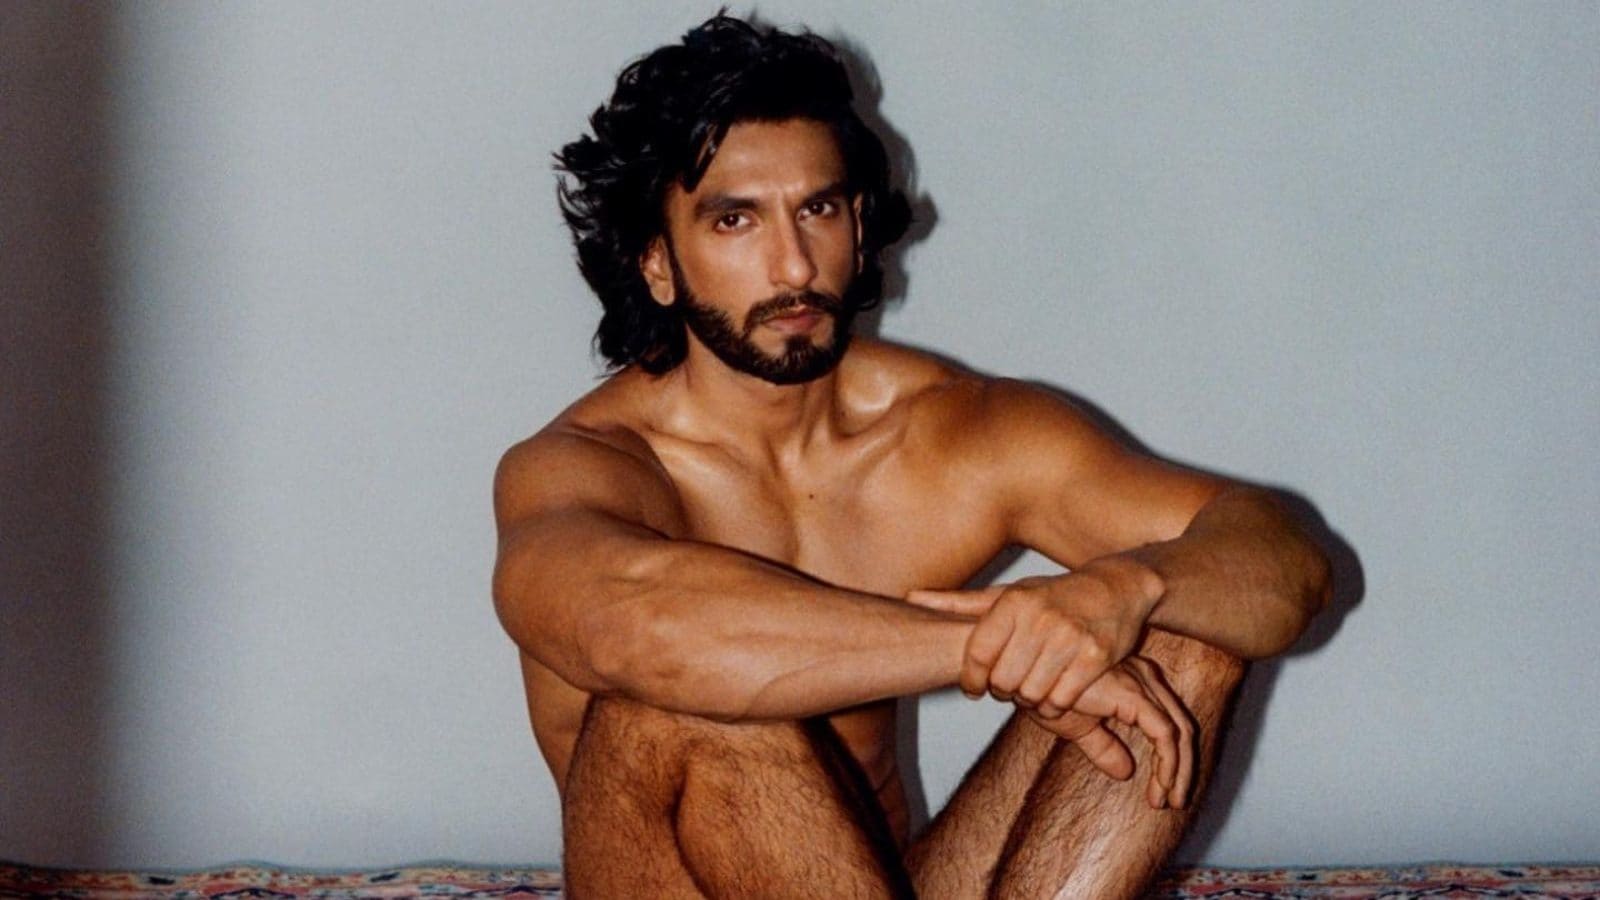 Bangla Lady Boy Xxx Video With Shirt - BuzzFix: Why Ranveer Singh's Masculinity Redefining Nude Shoot Does Not  Insult Women's Modesty